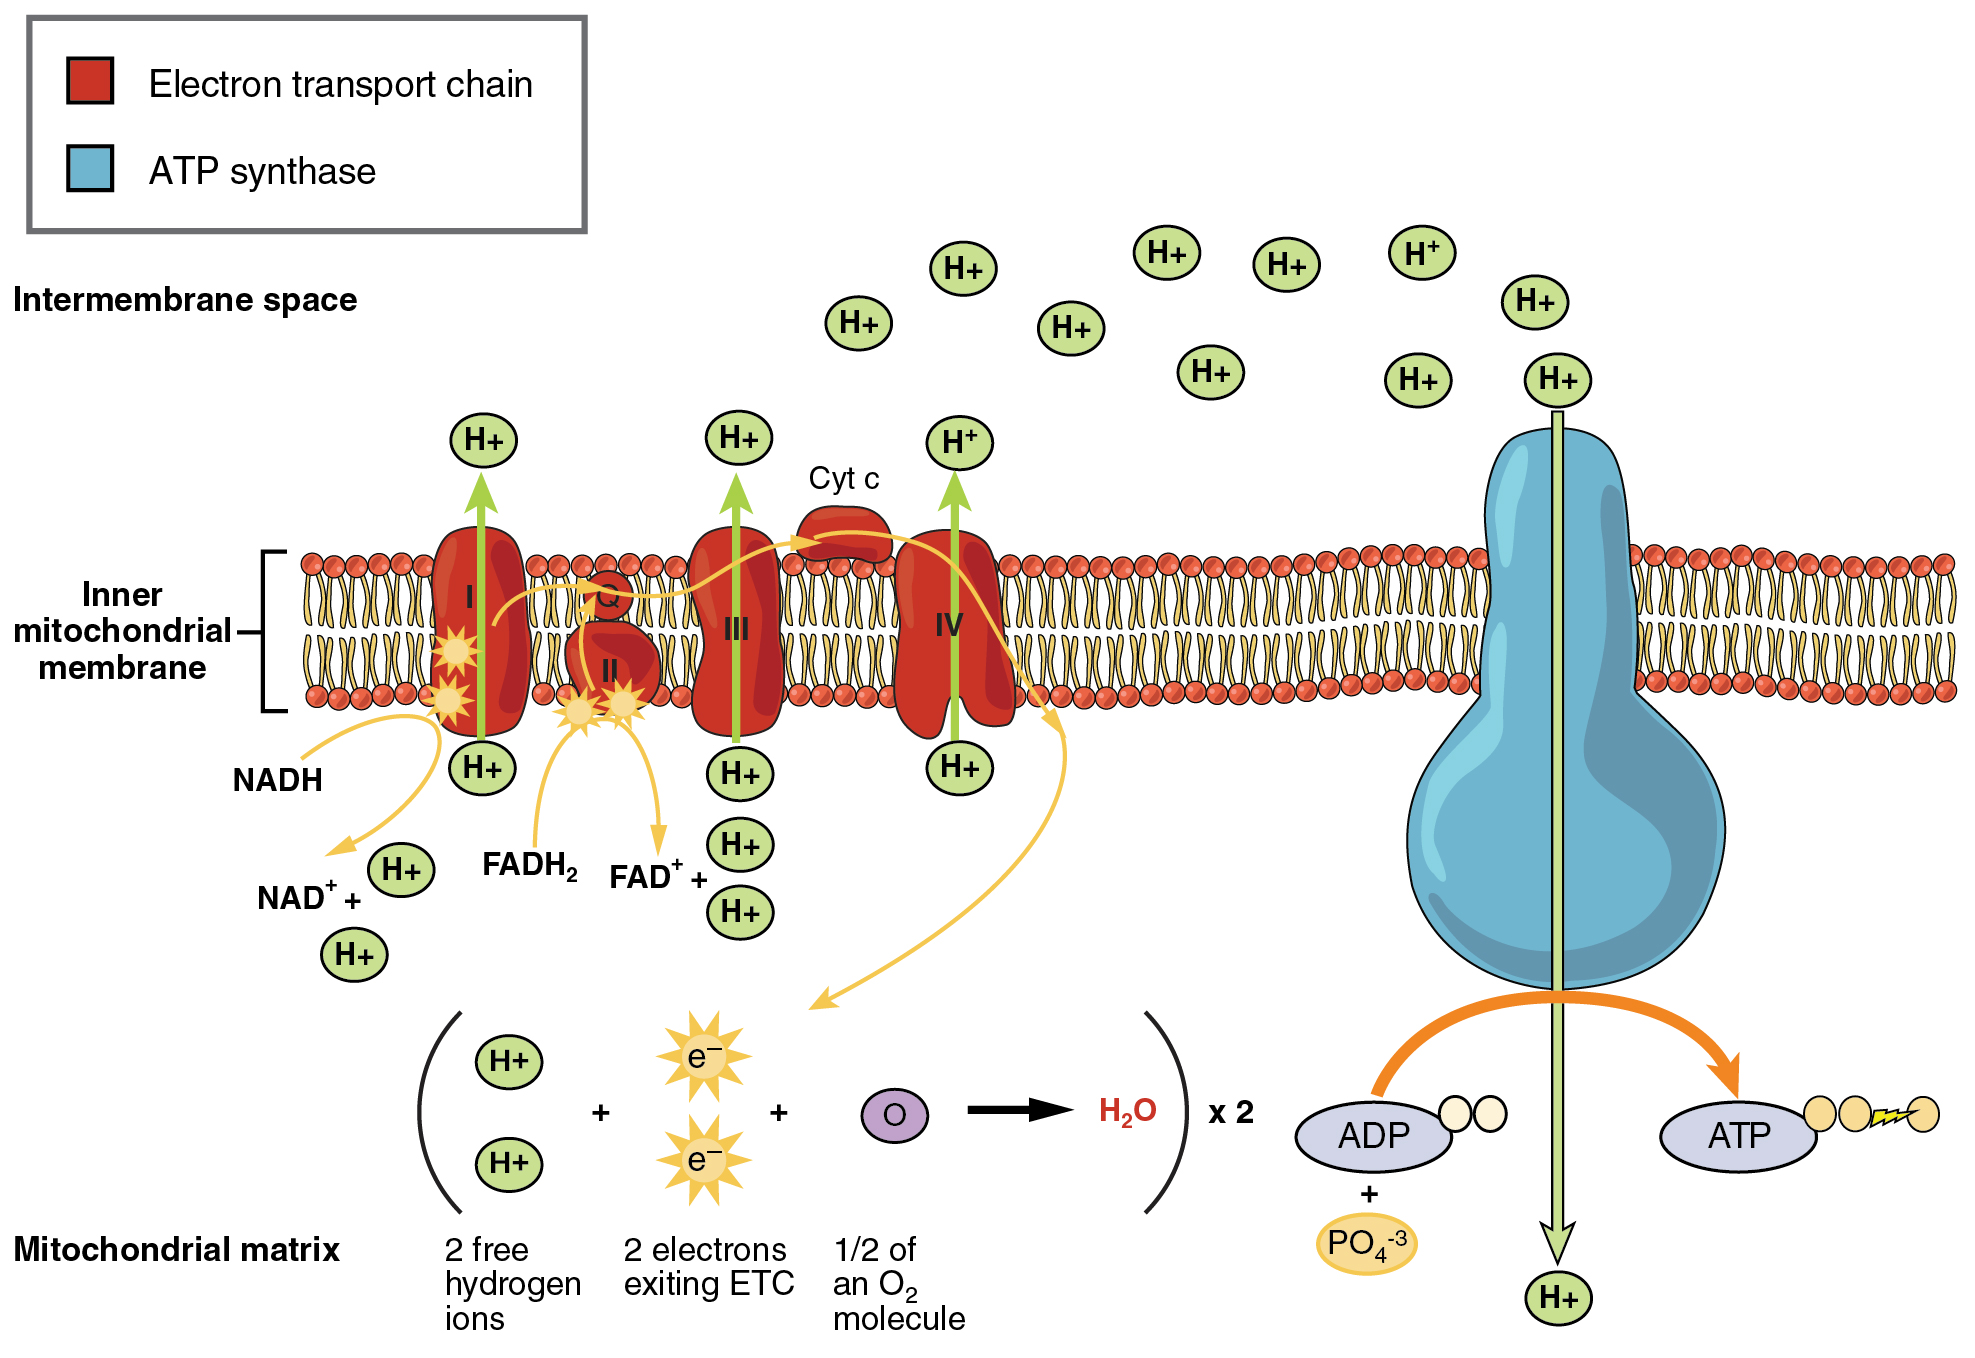 Image showing the chemical reactions of the electron transport chain